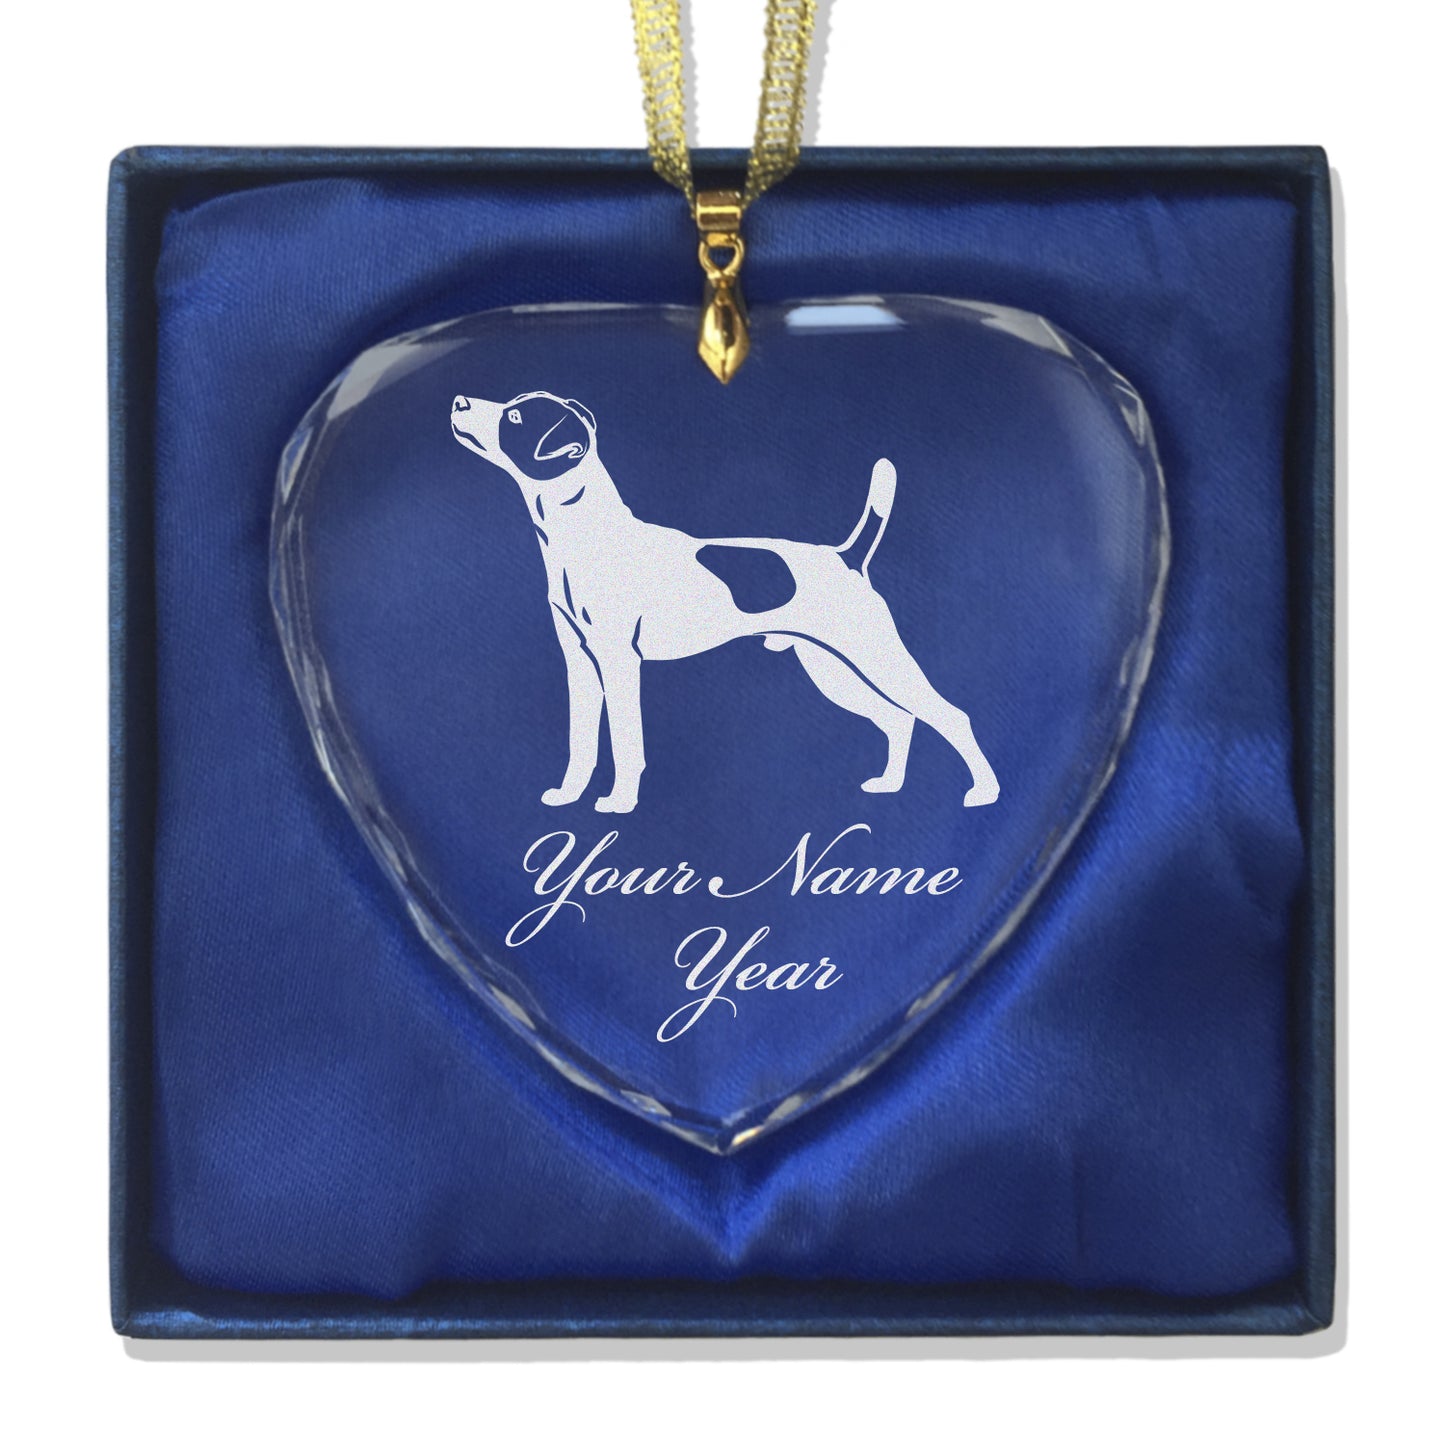 LaserGram Christmas Ornament, Jack Russell Terrier Dog, Personalized Engraving Included (Heart Shape)